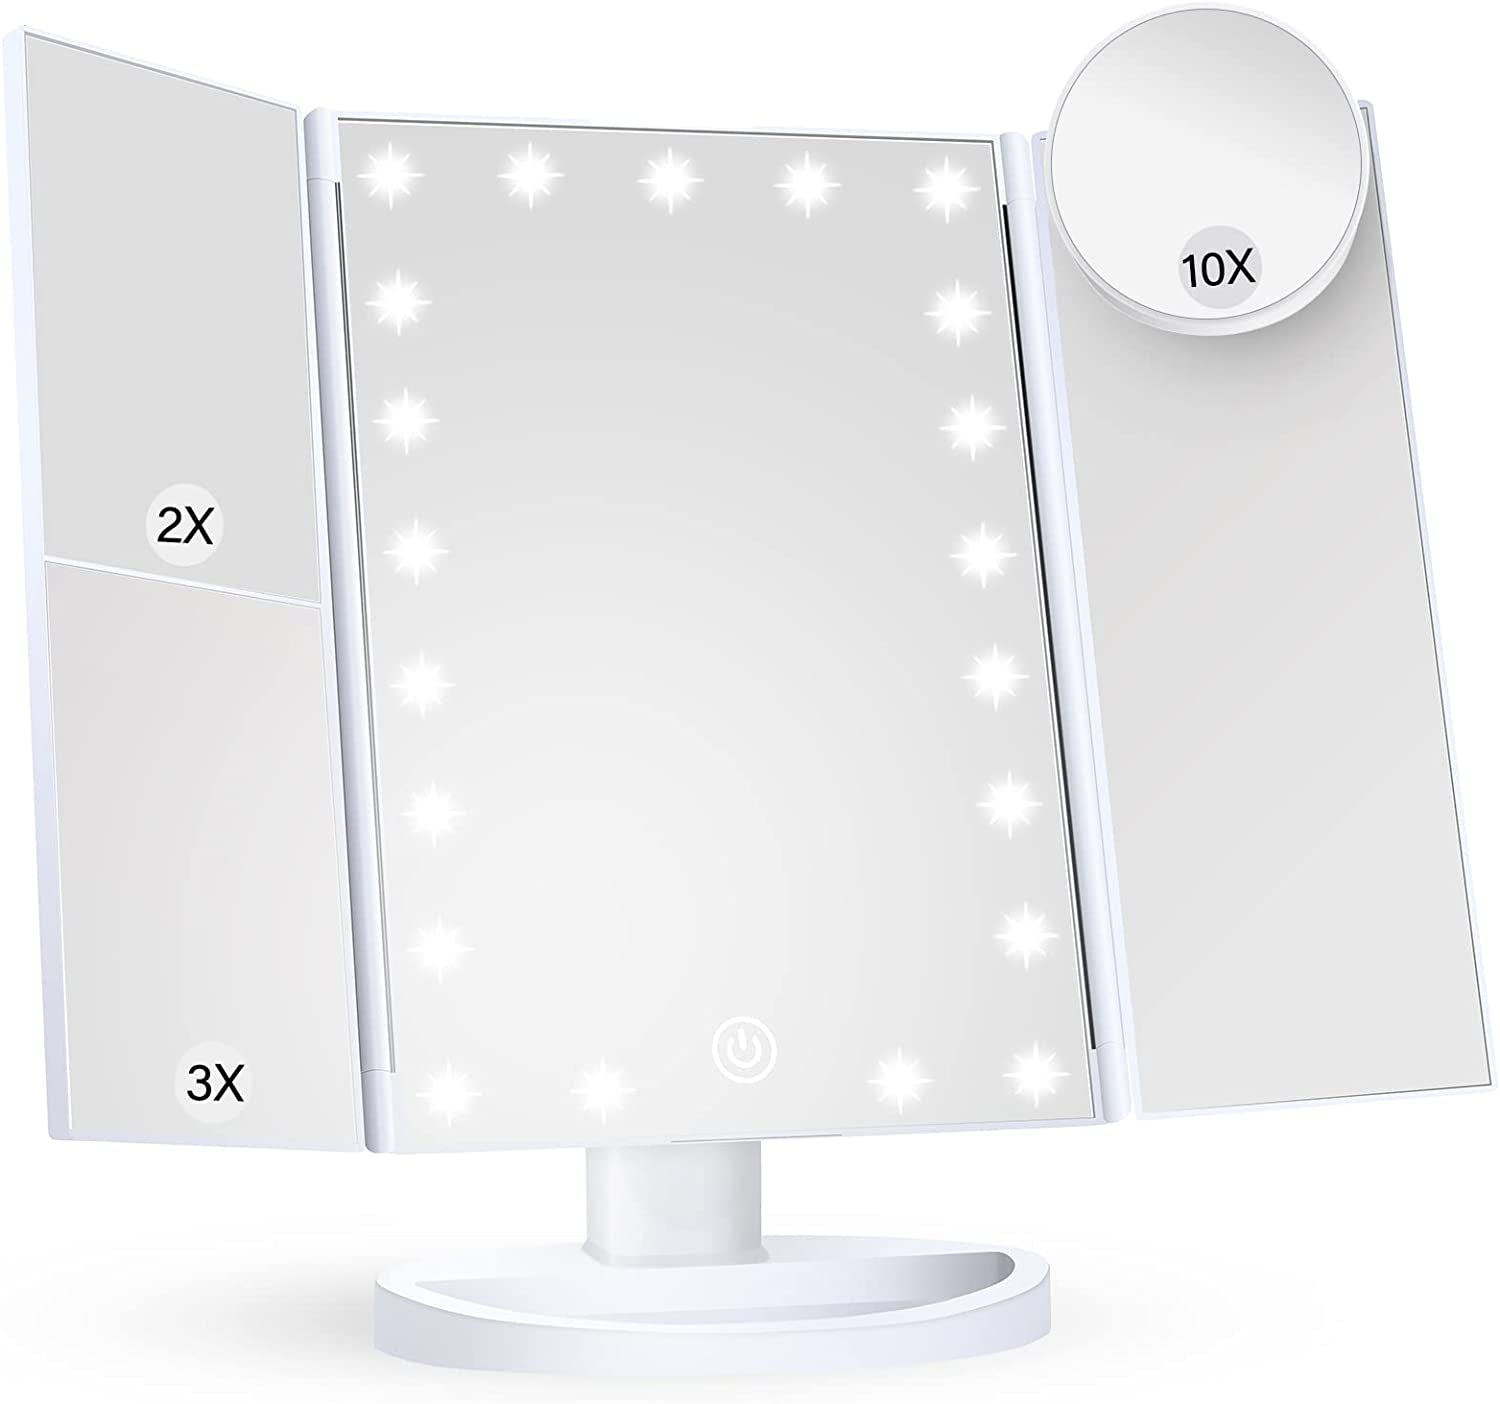 Spring Makeup Mirror Vanity Mirror with Lights, 2X 3X 10X Magnification